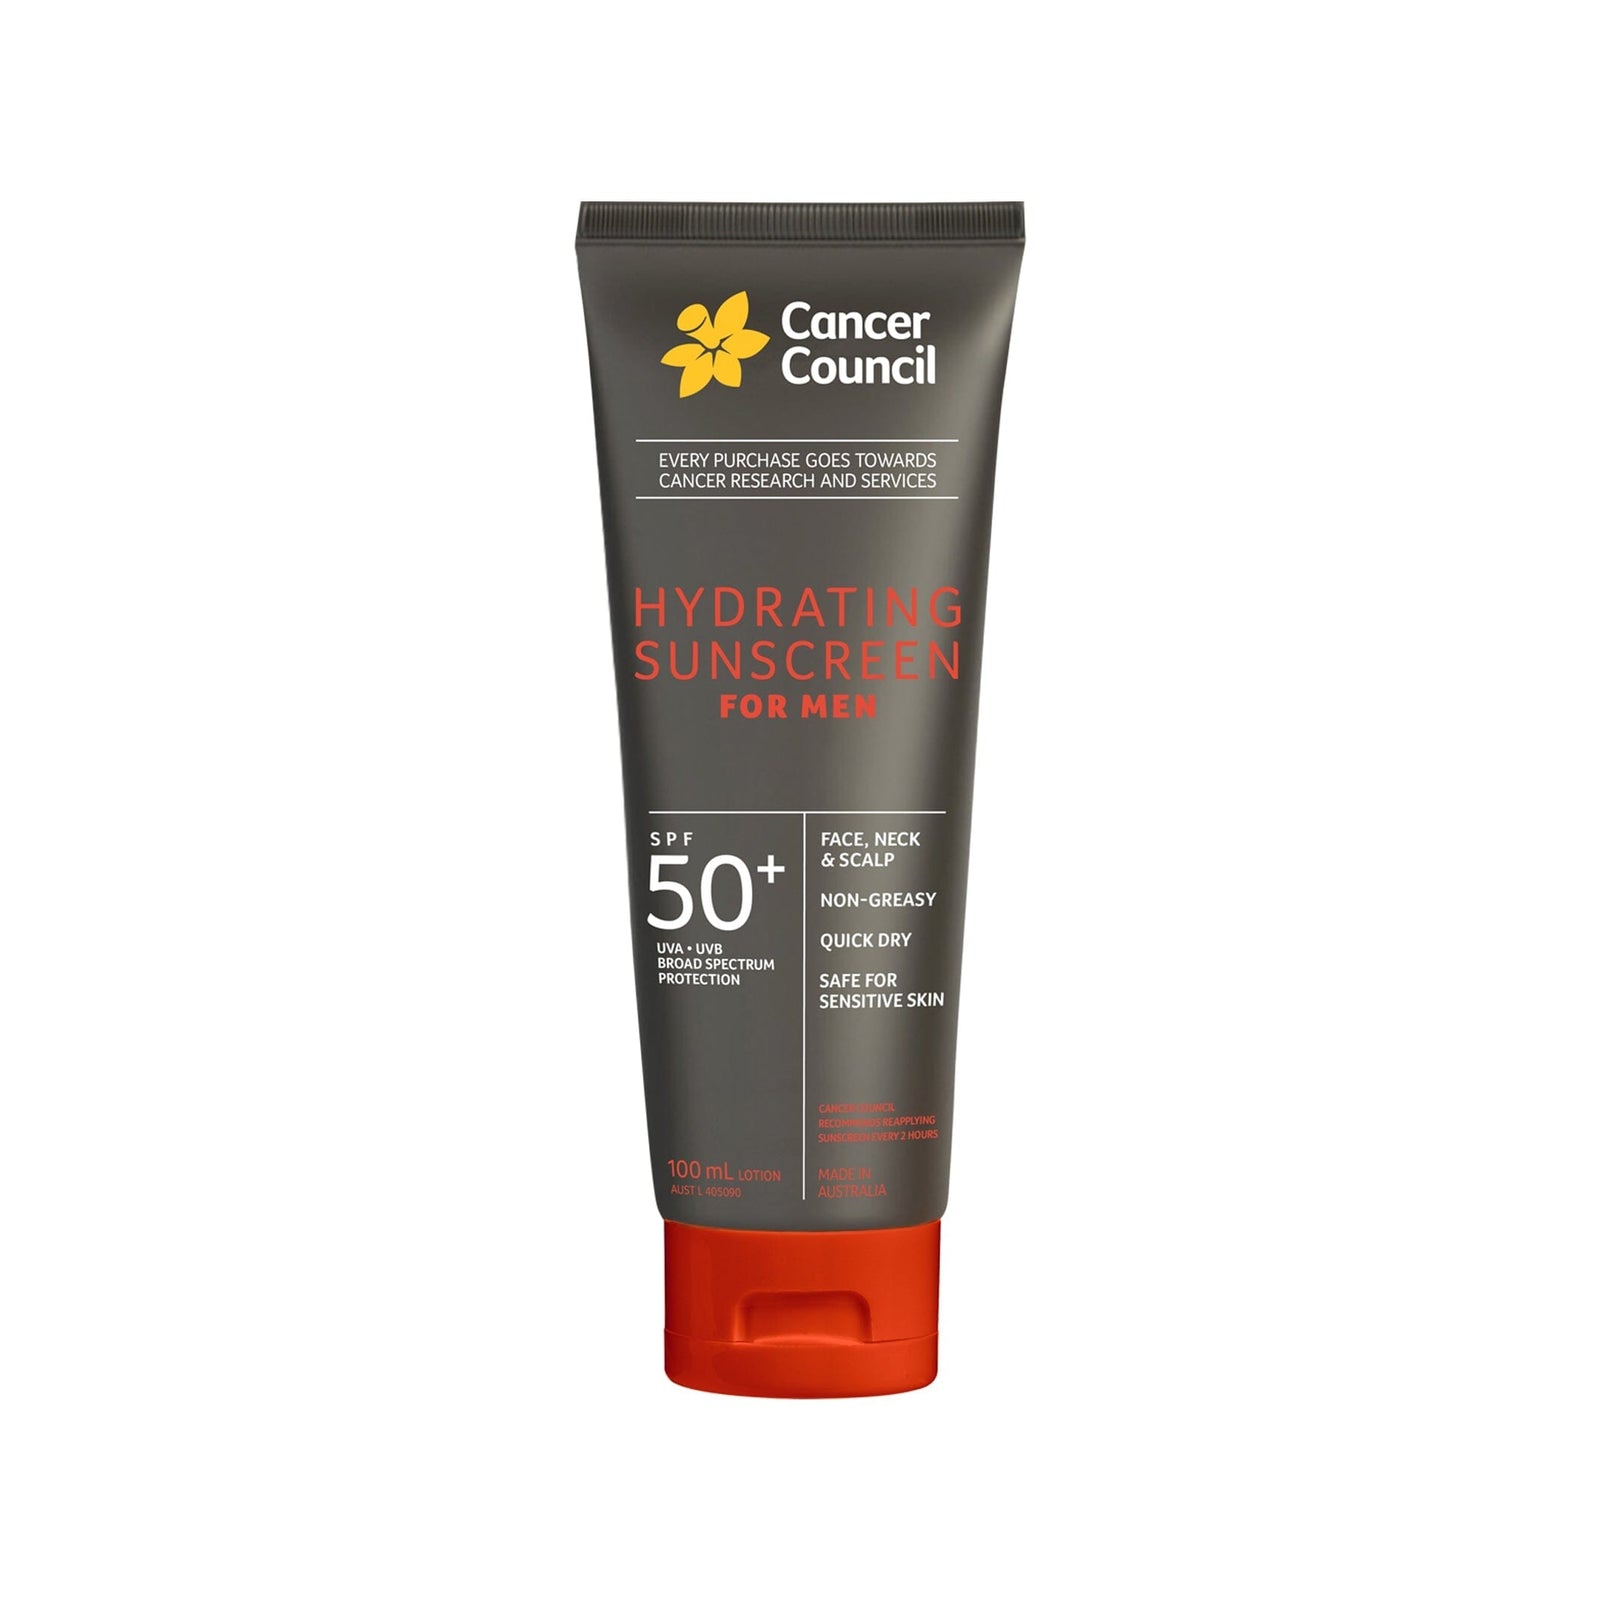 Cancer Council Hydrating Sunscreen for Men SPF50+ 100ml 